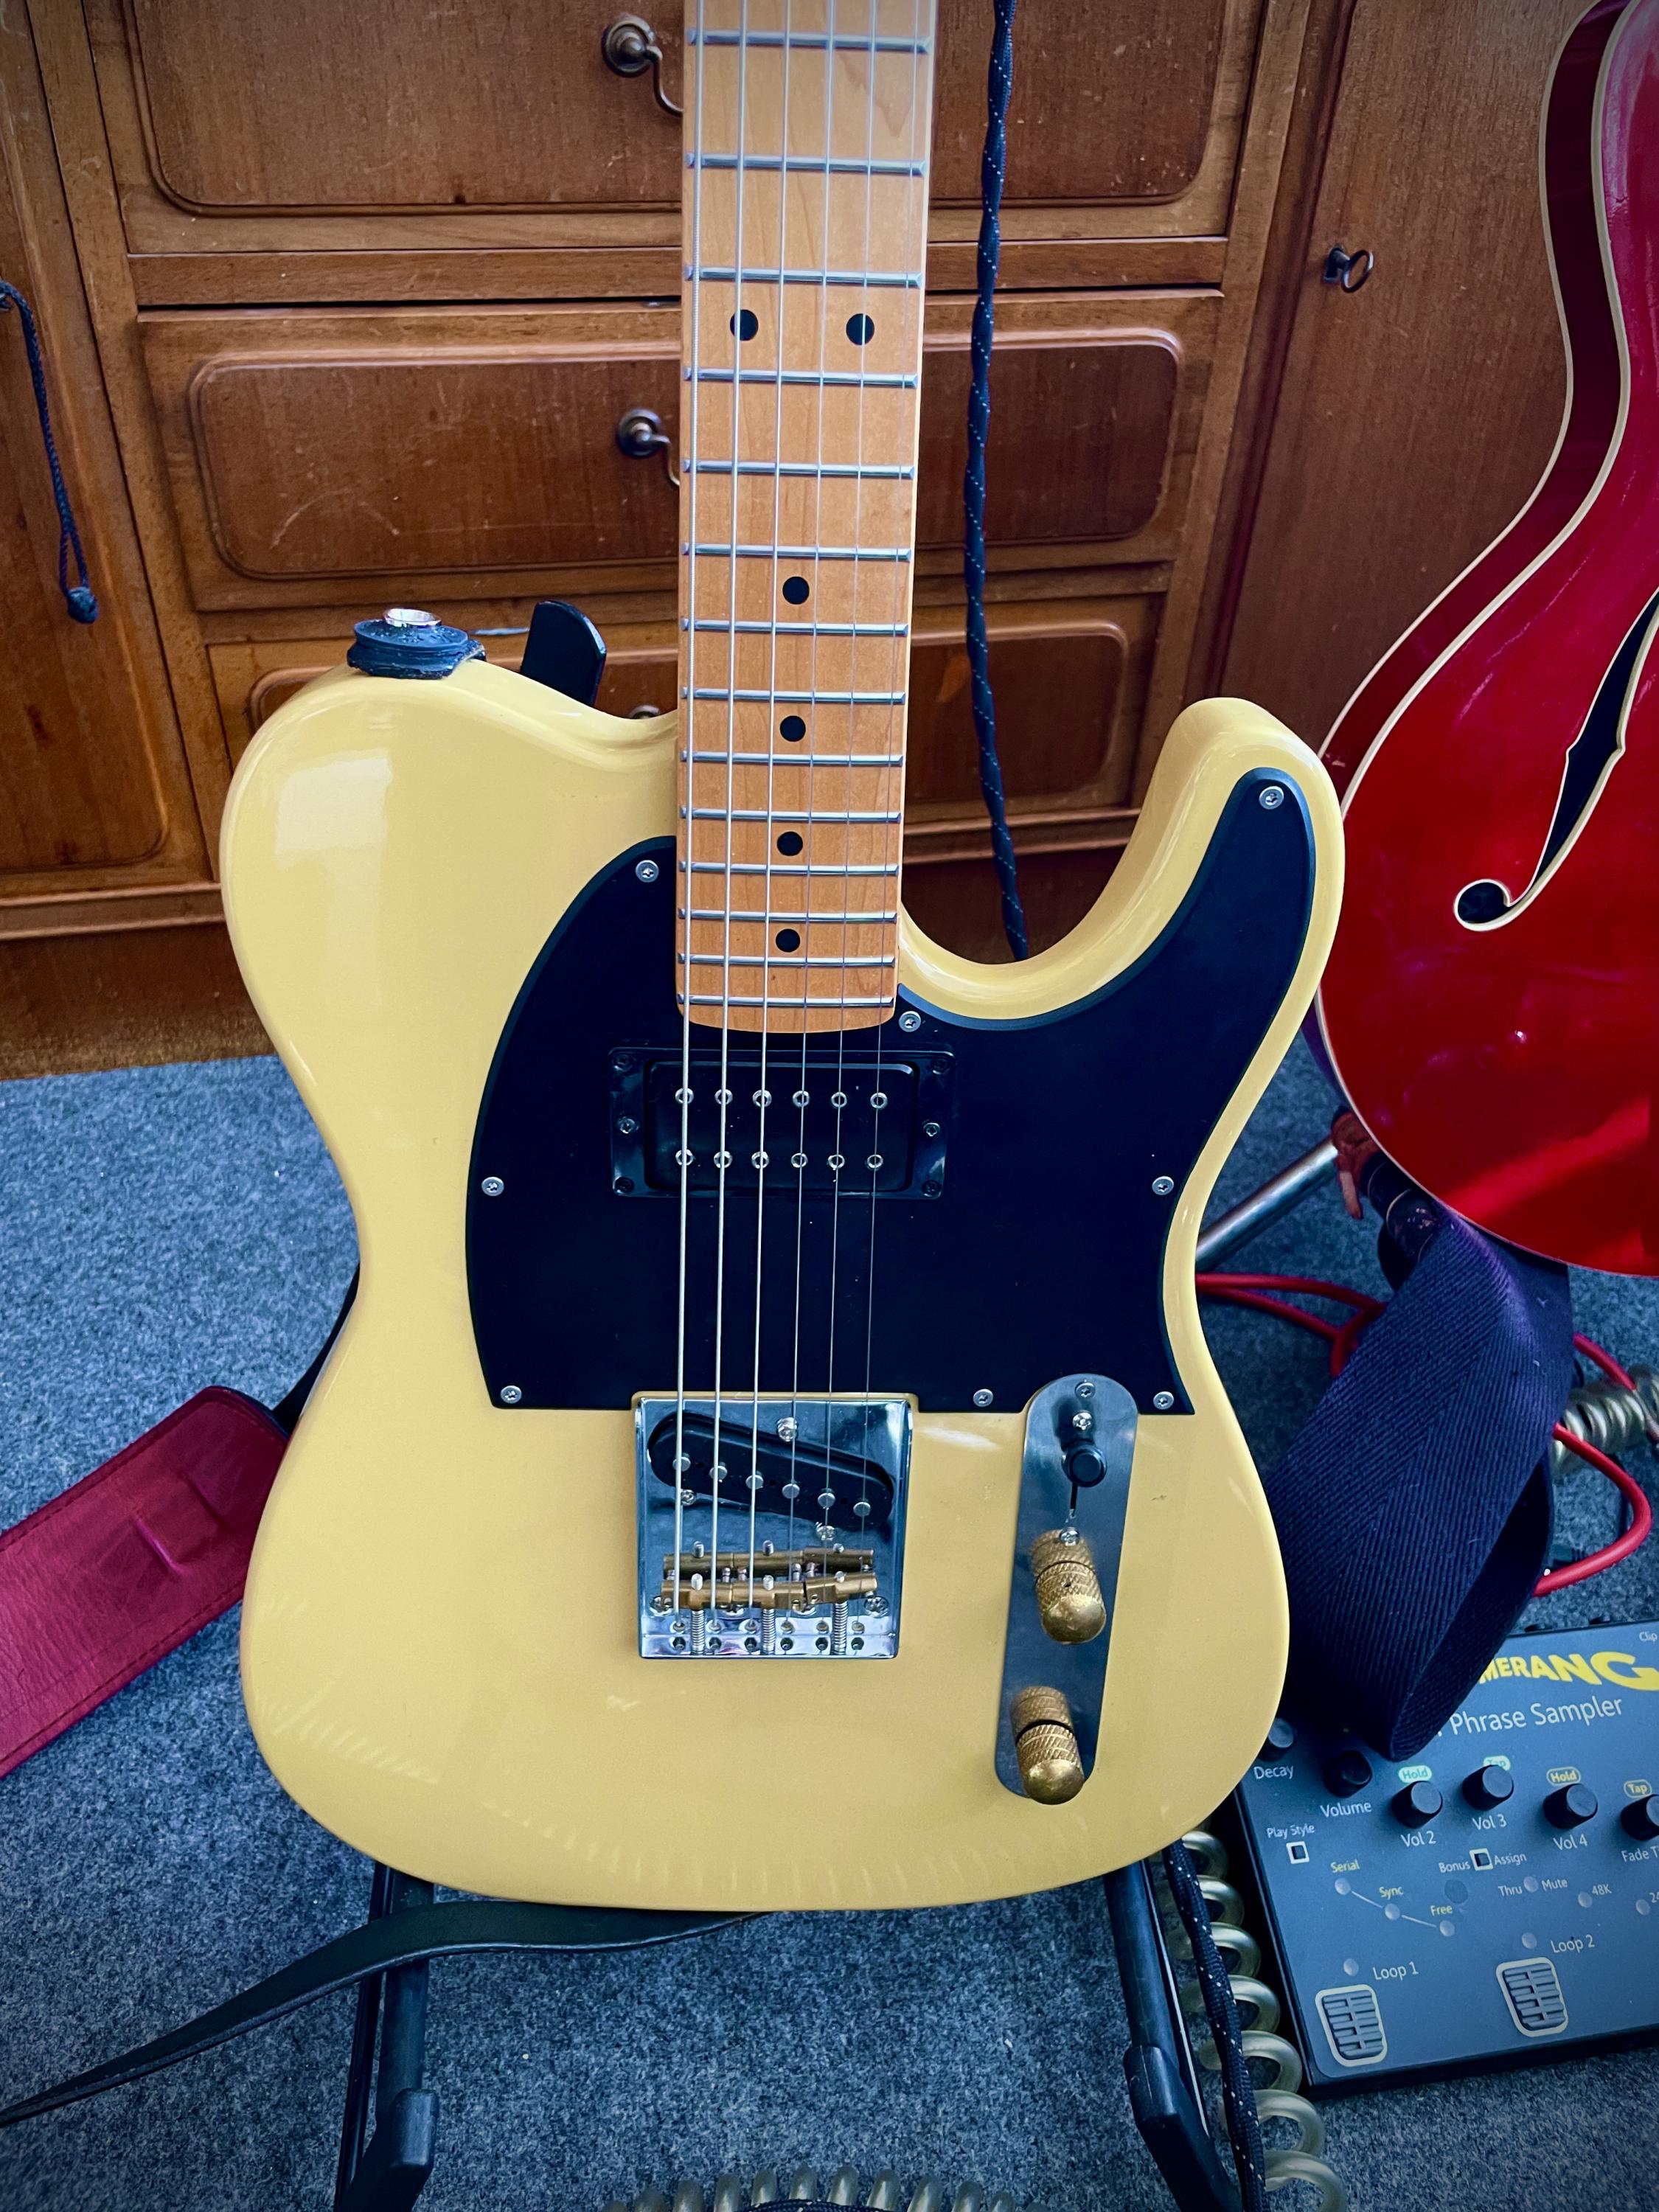 Telecaster Love Thread, No Archtops Allowed-img_8944-jpg